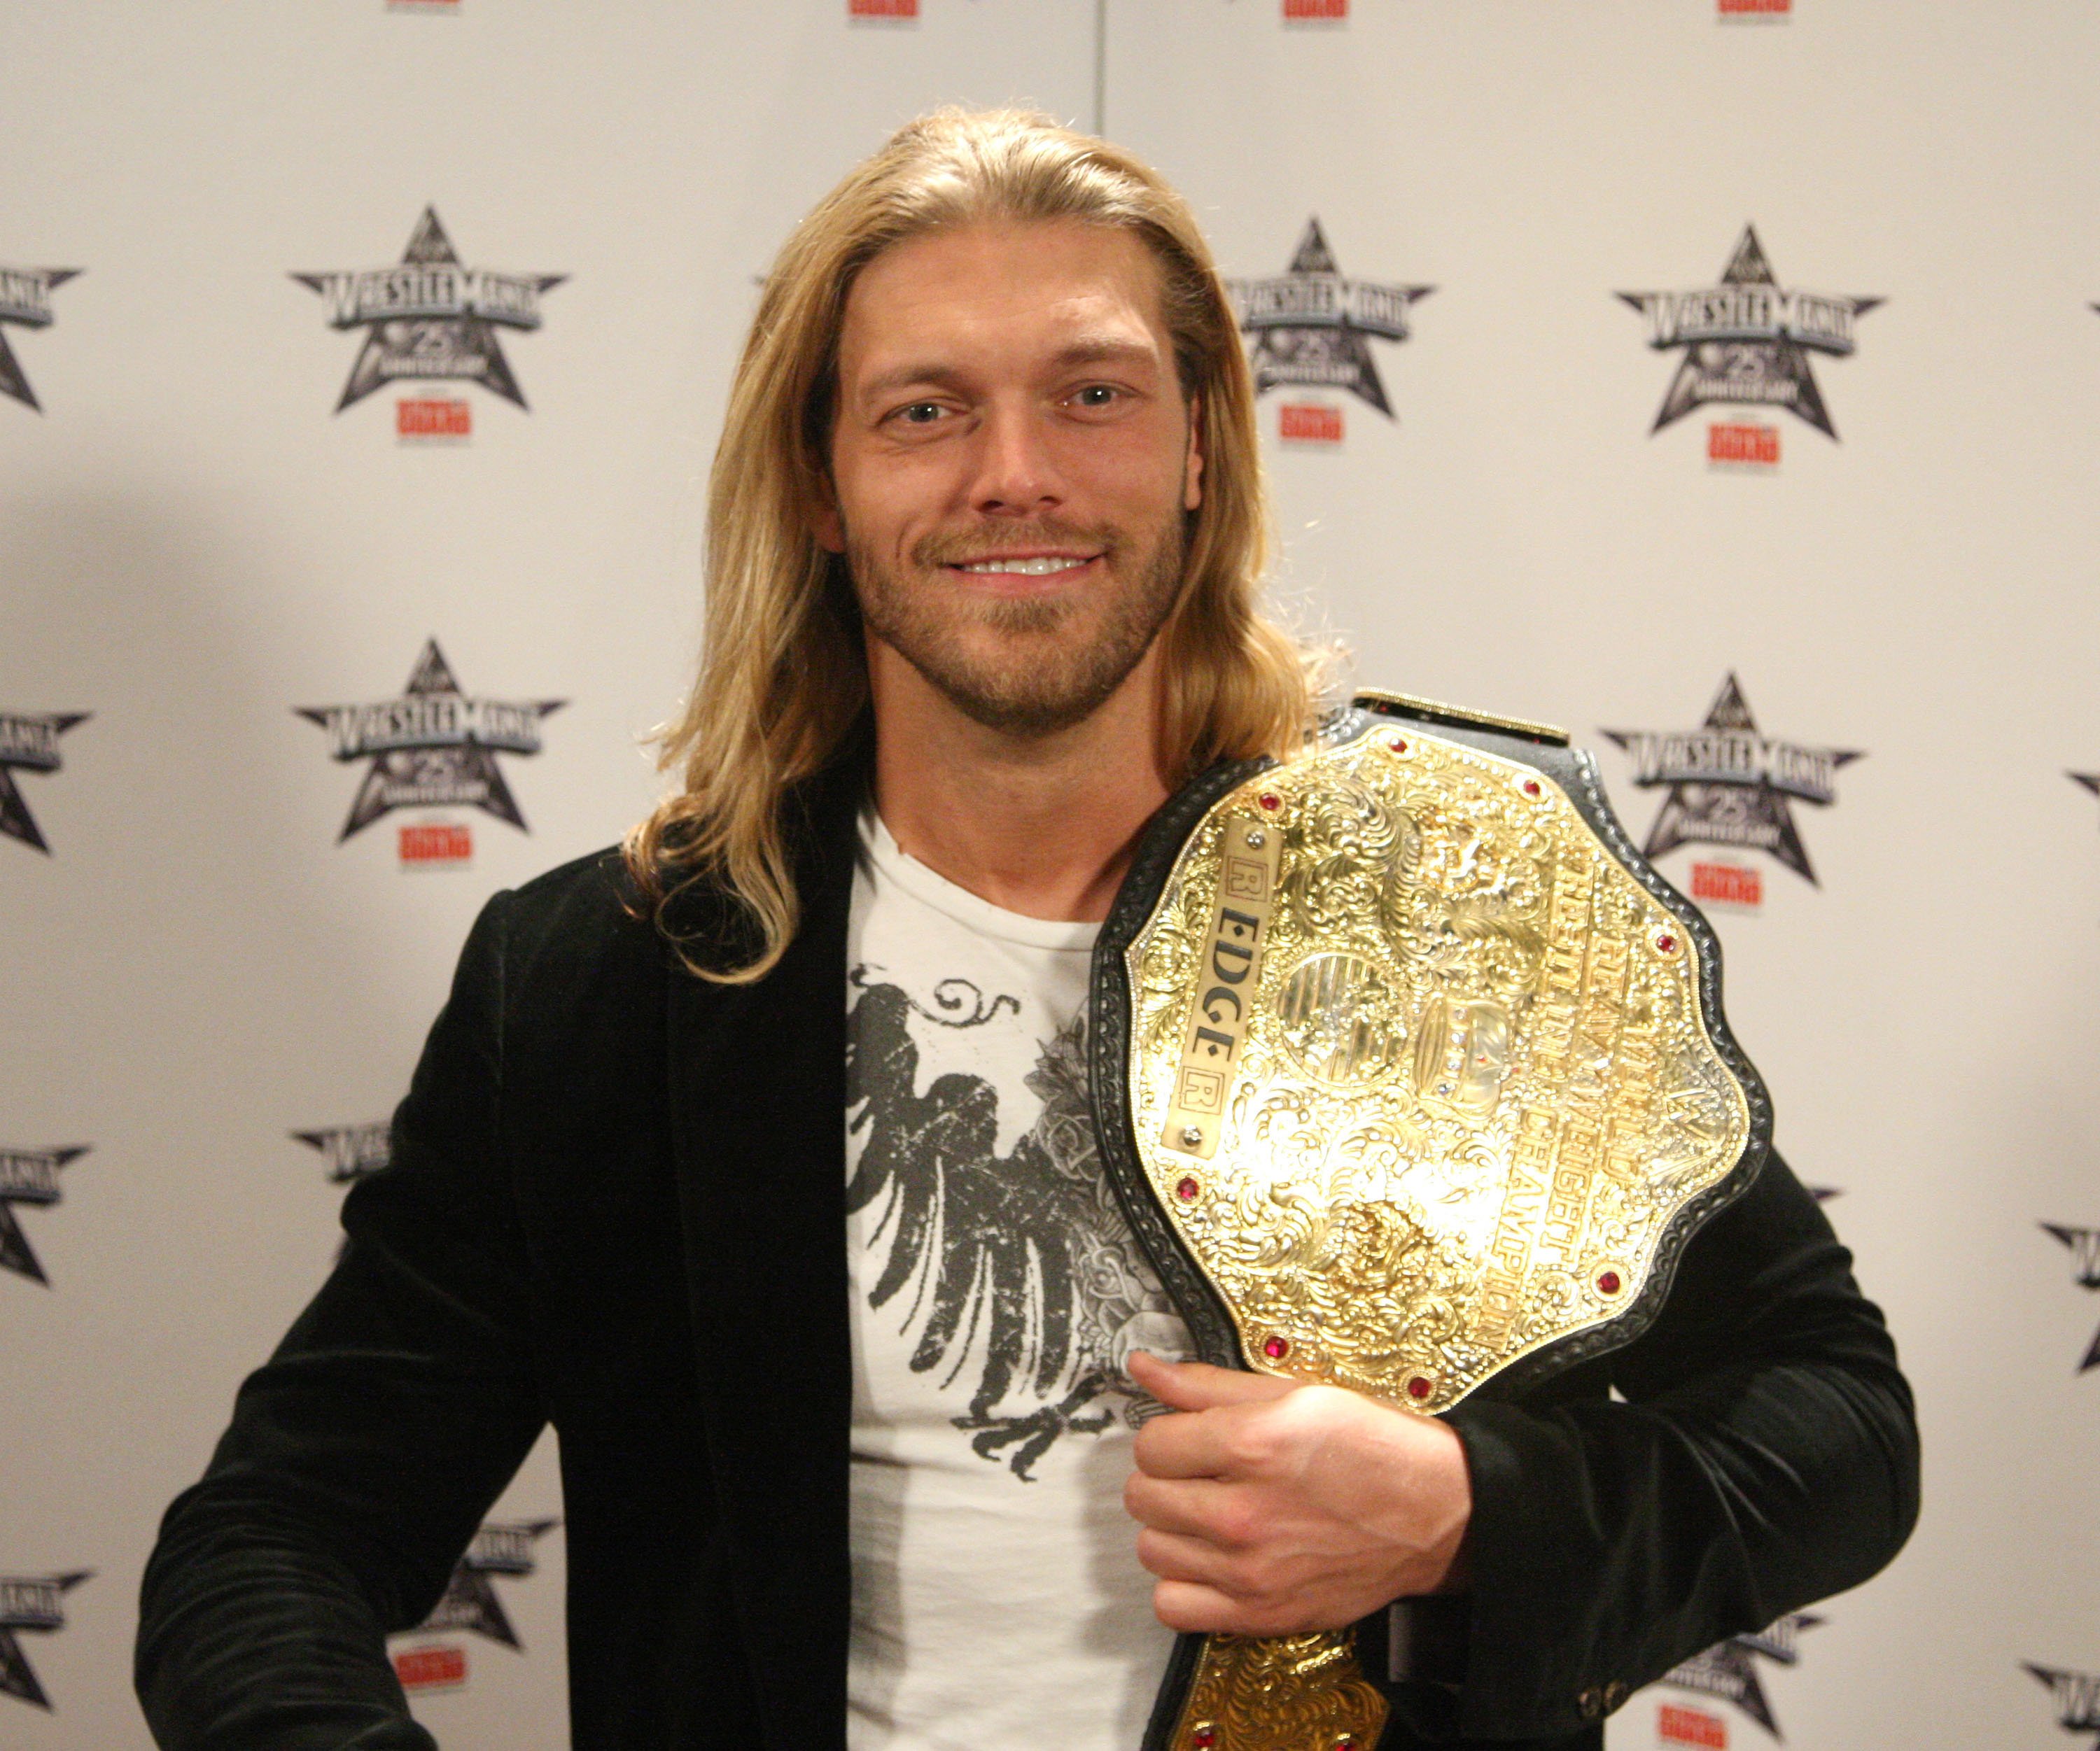 Edge at the WrestleMania 25th anniversary press conference on March 31, 2009, in New York City. | Source: Getty Images